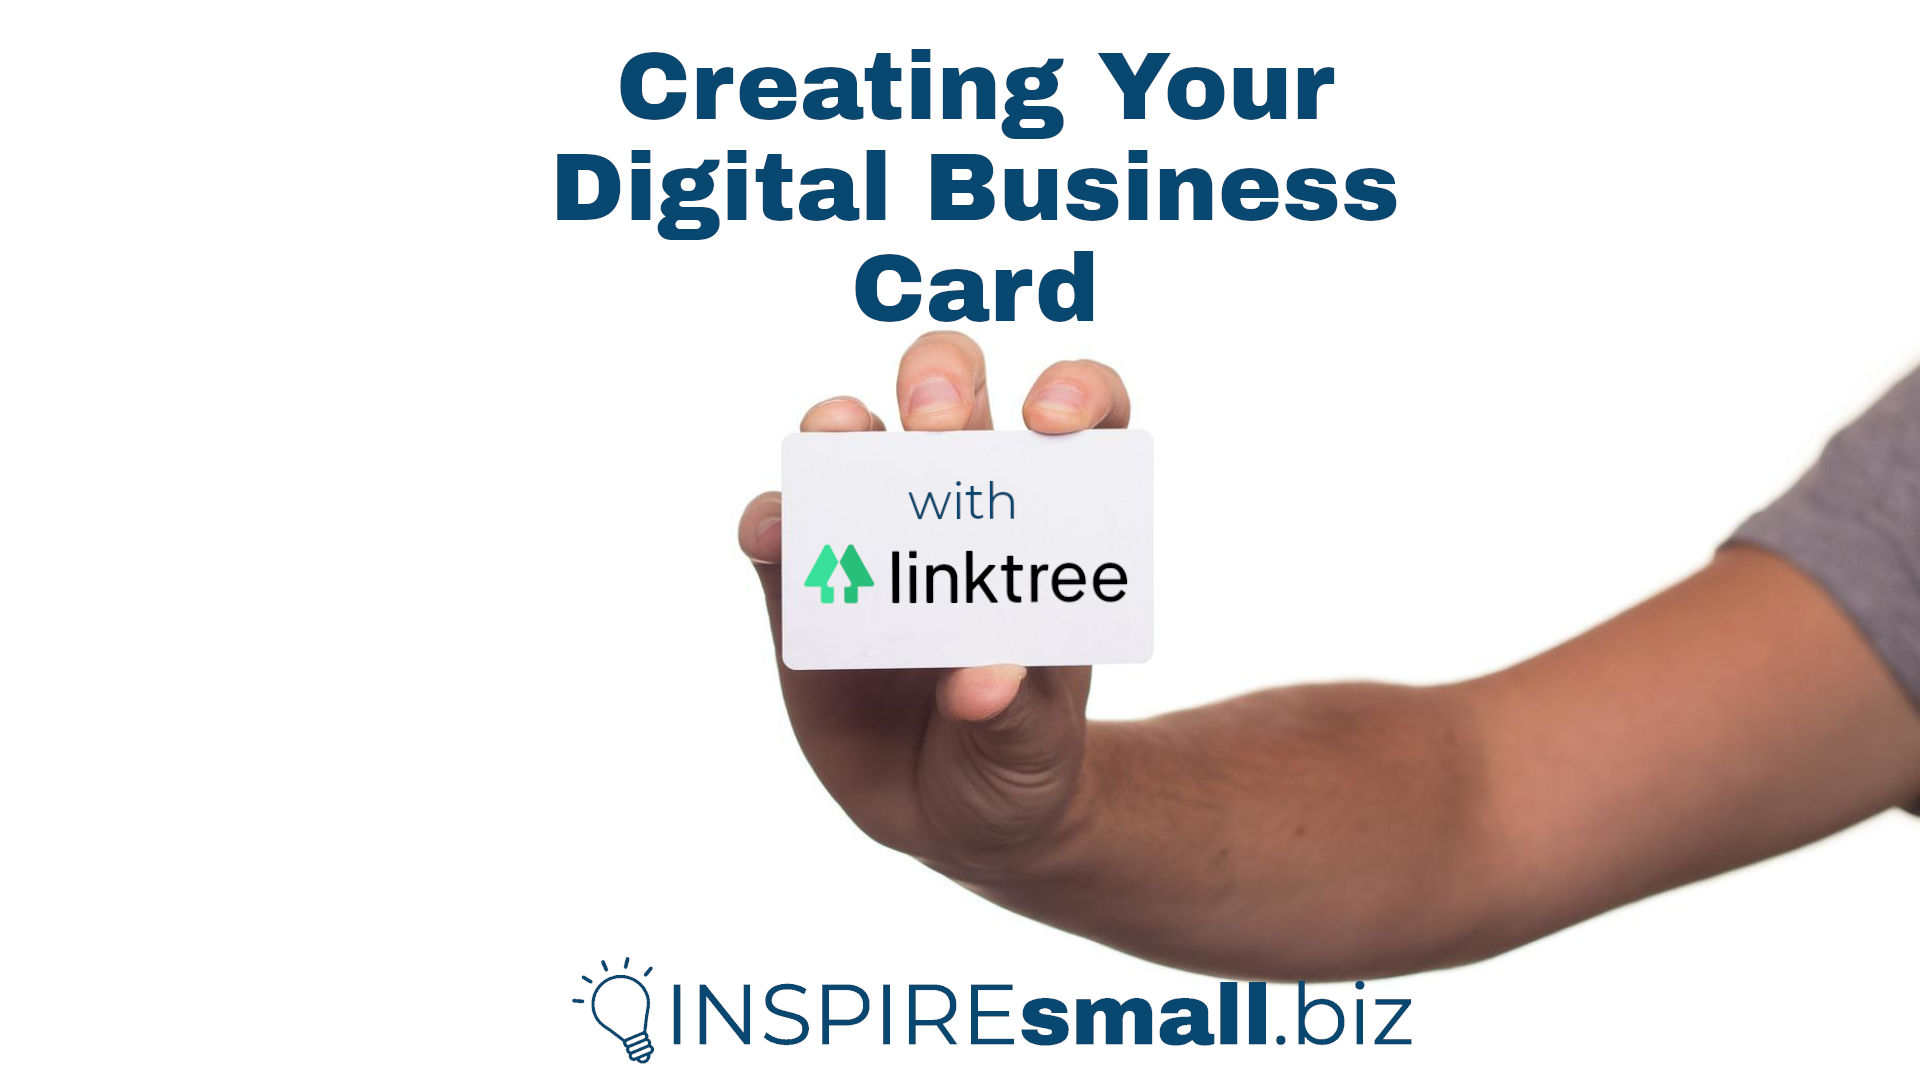 Creating Your Digital Business Card with Linktree